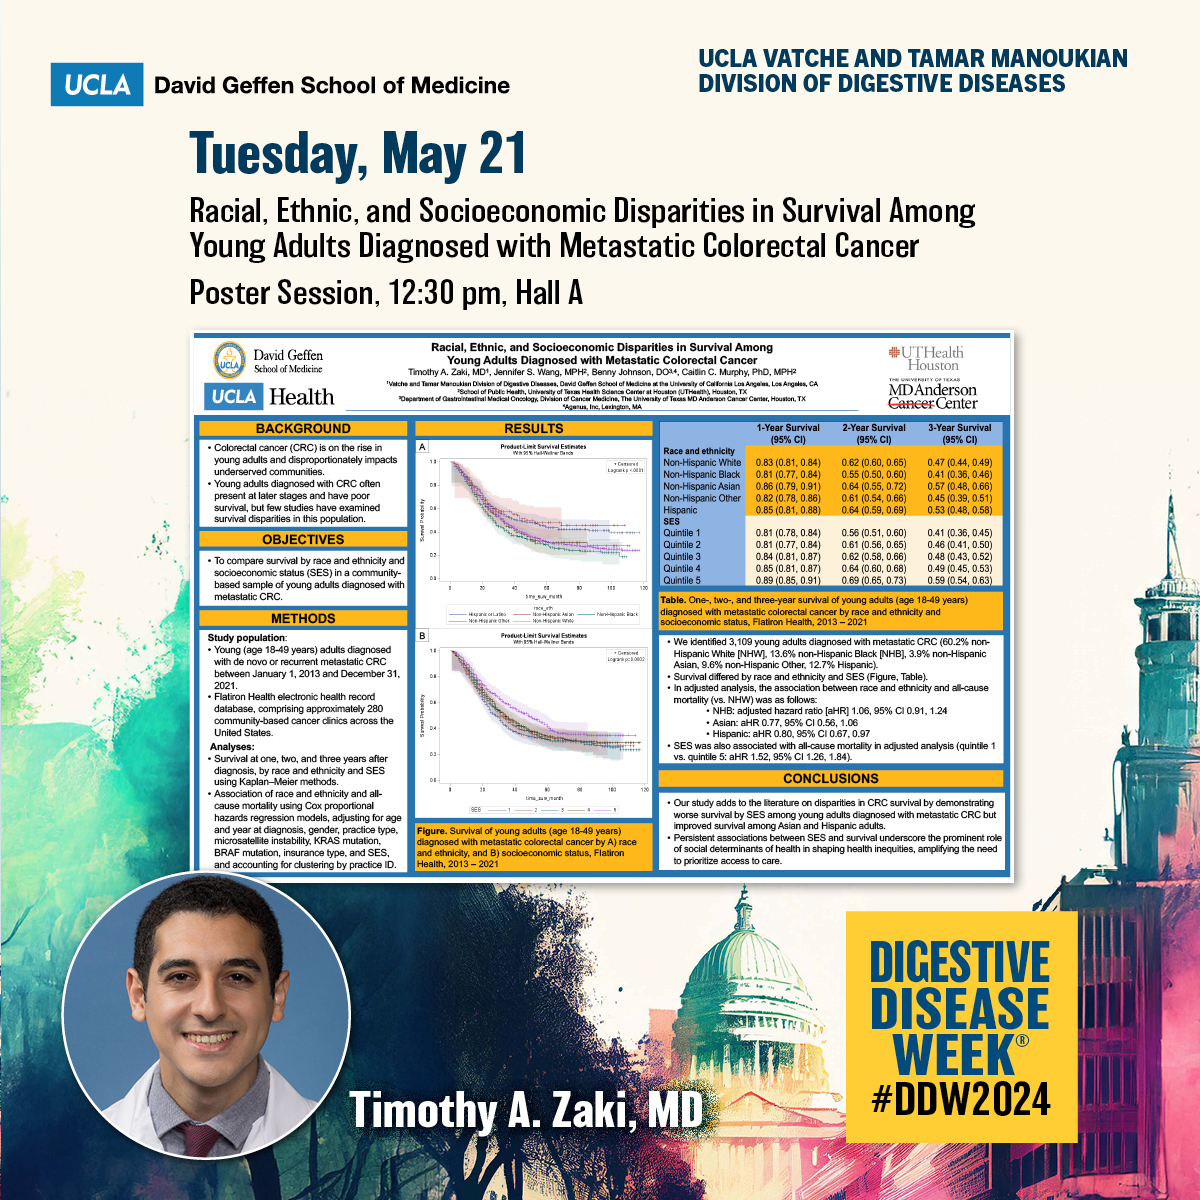 🙌#DDW2024 Poster, Tuesday, May 21, 12:30 pm

Racial, Ethnic, and Socioeconomic Disparities in Survival Among Young Adults Diagnosed with Metastatic #ColorectalCancer

🌟Timothy A. Zaki, MD (@Timothy_A_Zaki)
👥Jennifer S. Wang, Benny Johnson, Caitlin C. Murphy